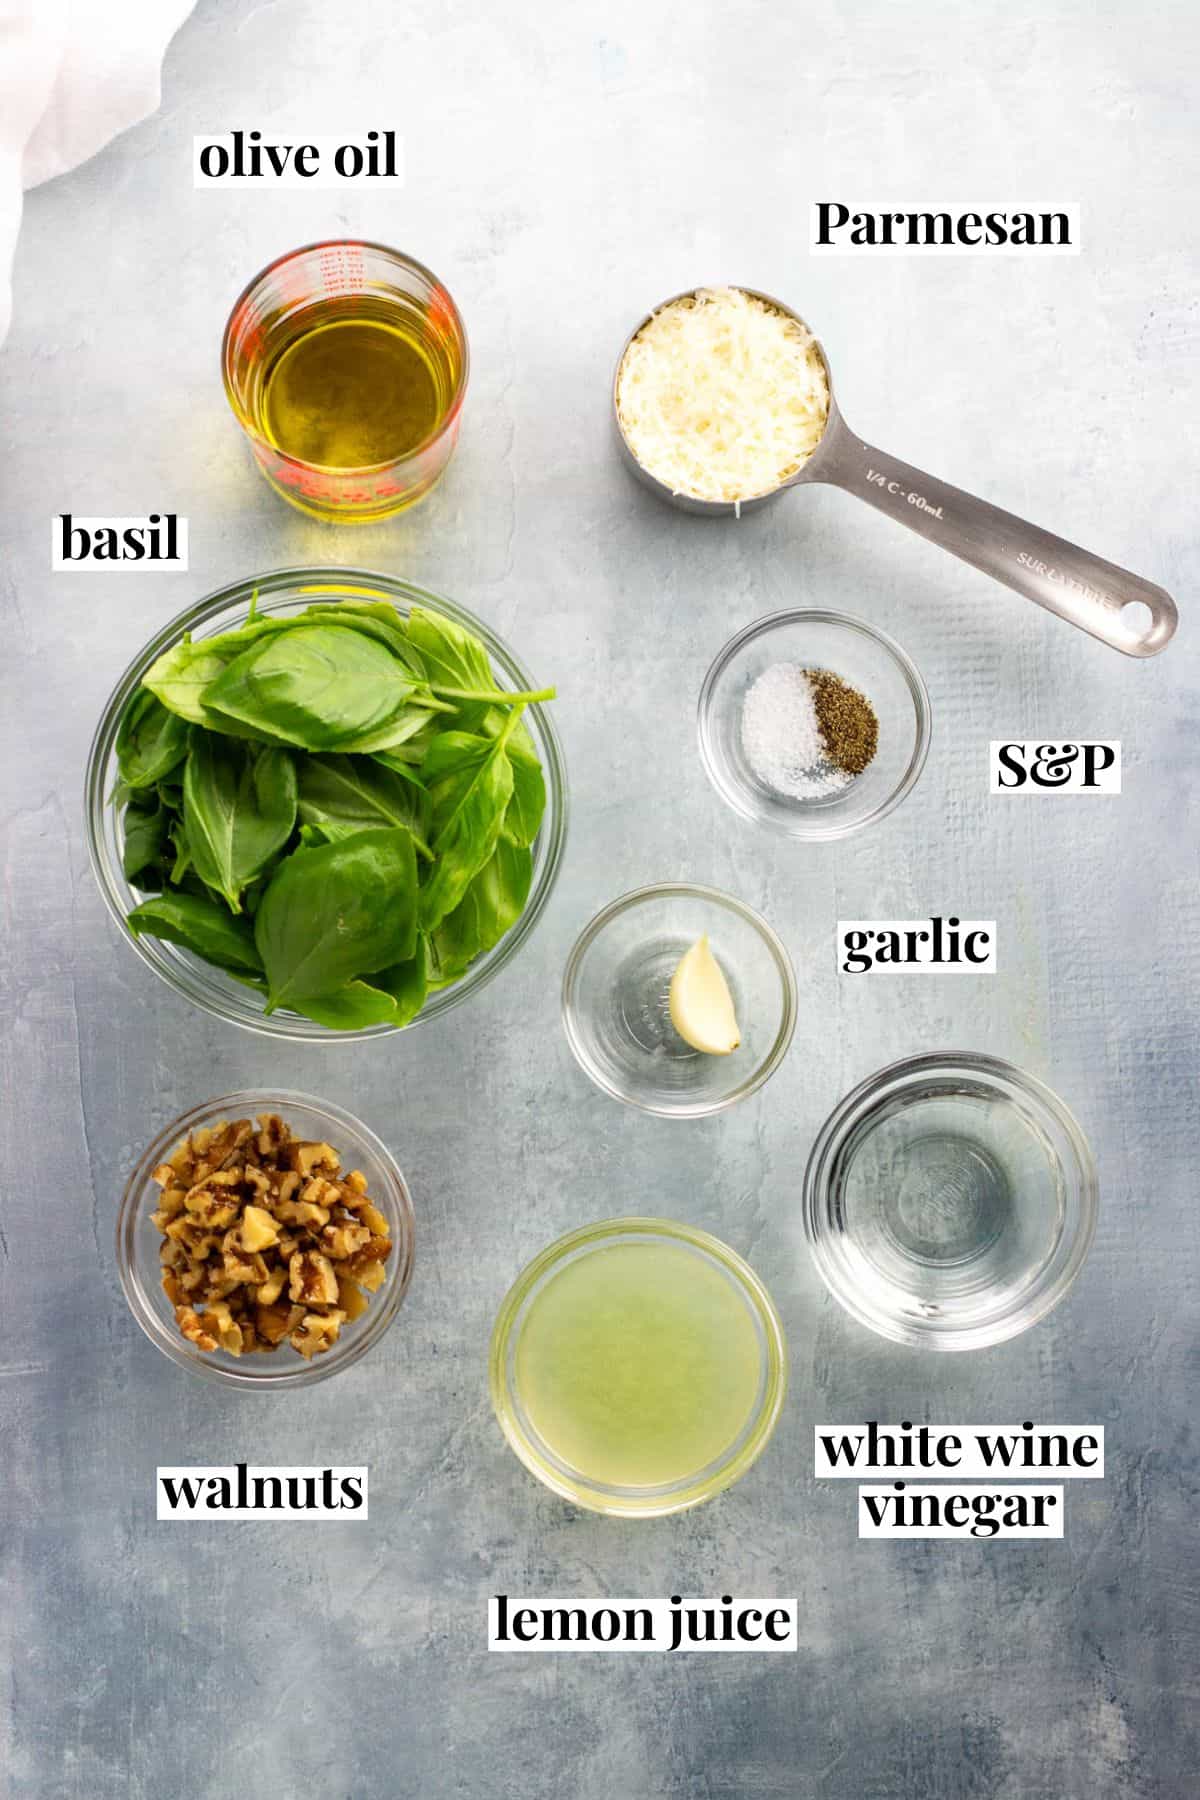 All recipe ingredients labeled with text names in separate containers.